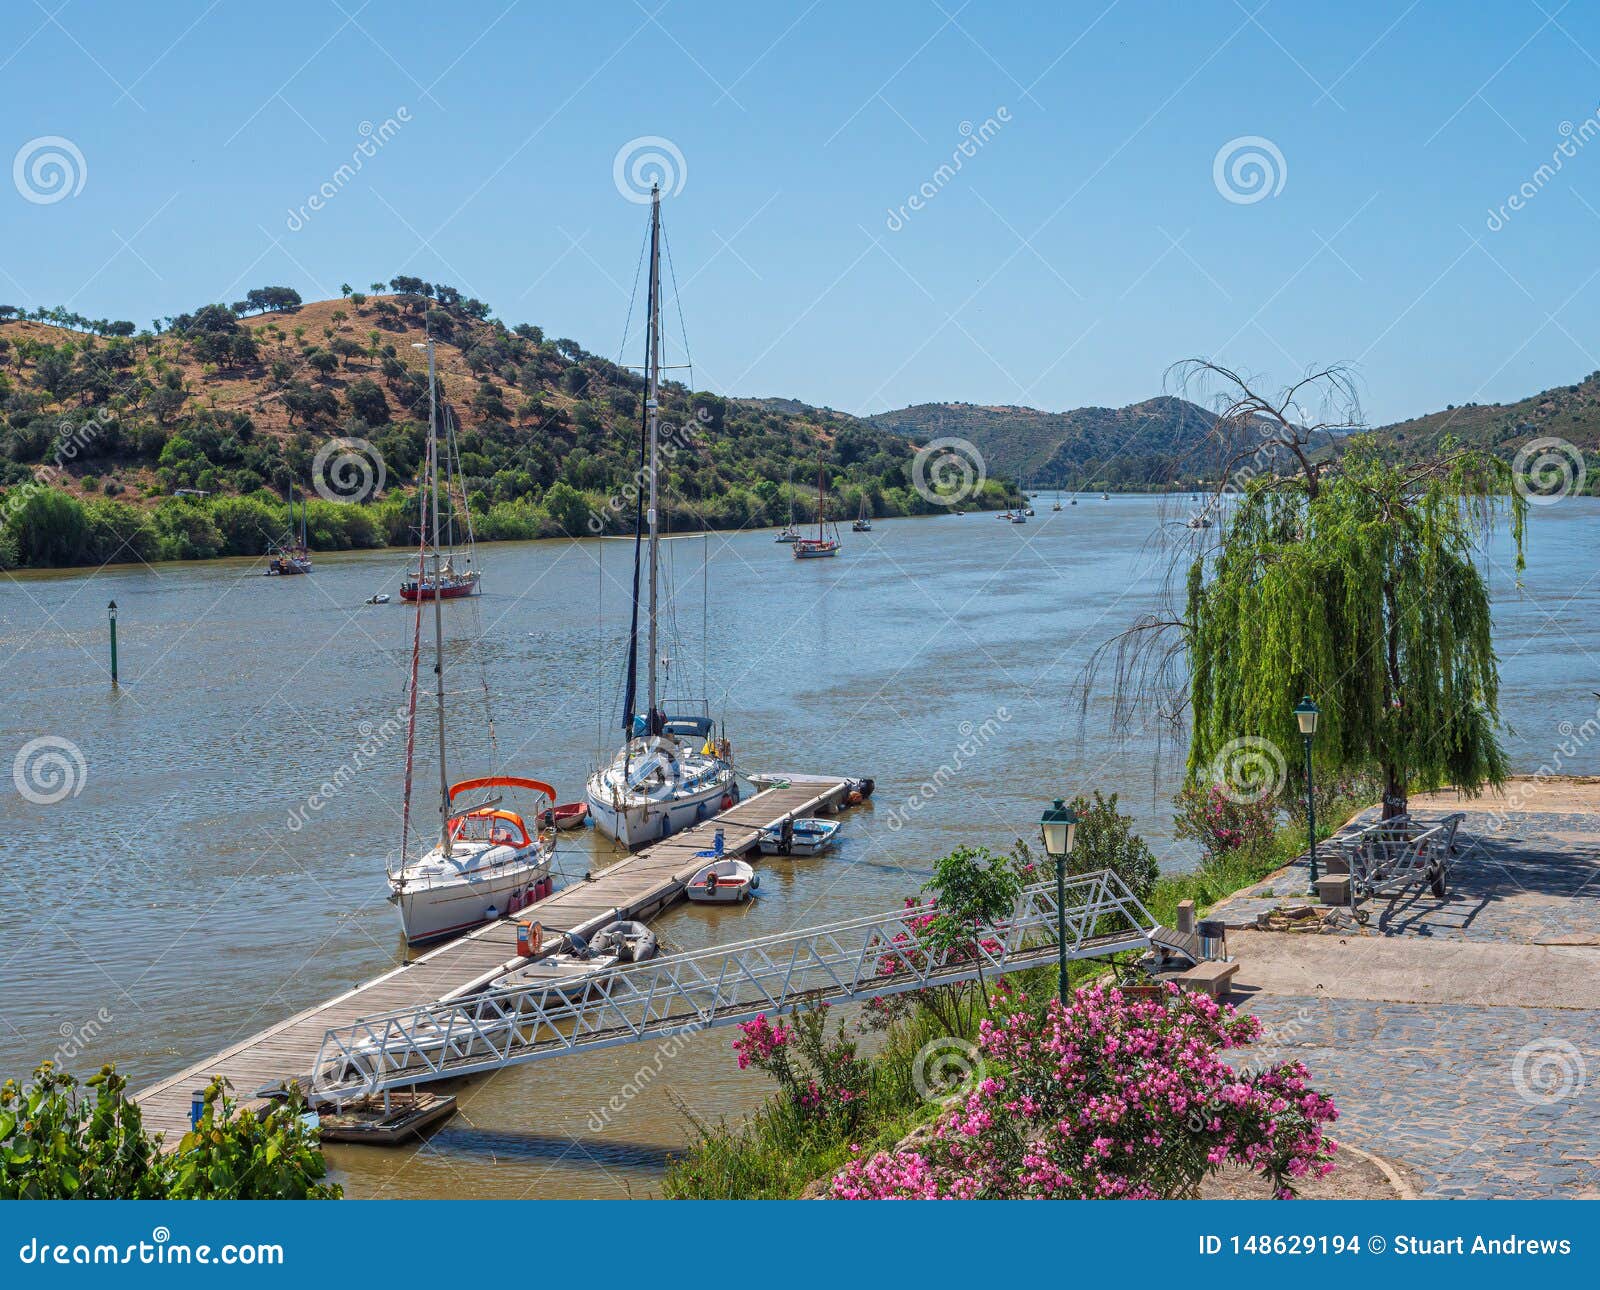 the guadiana river at alcoutim, portugal.